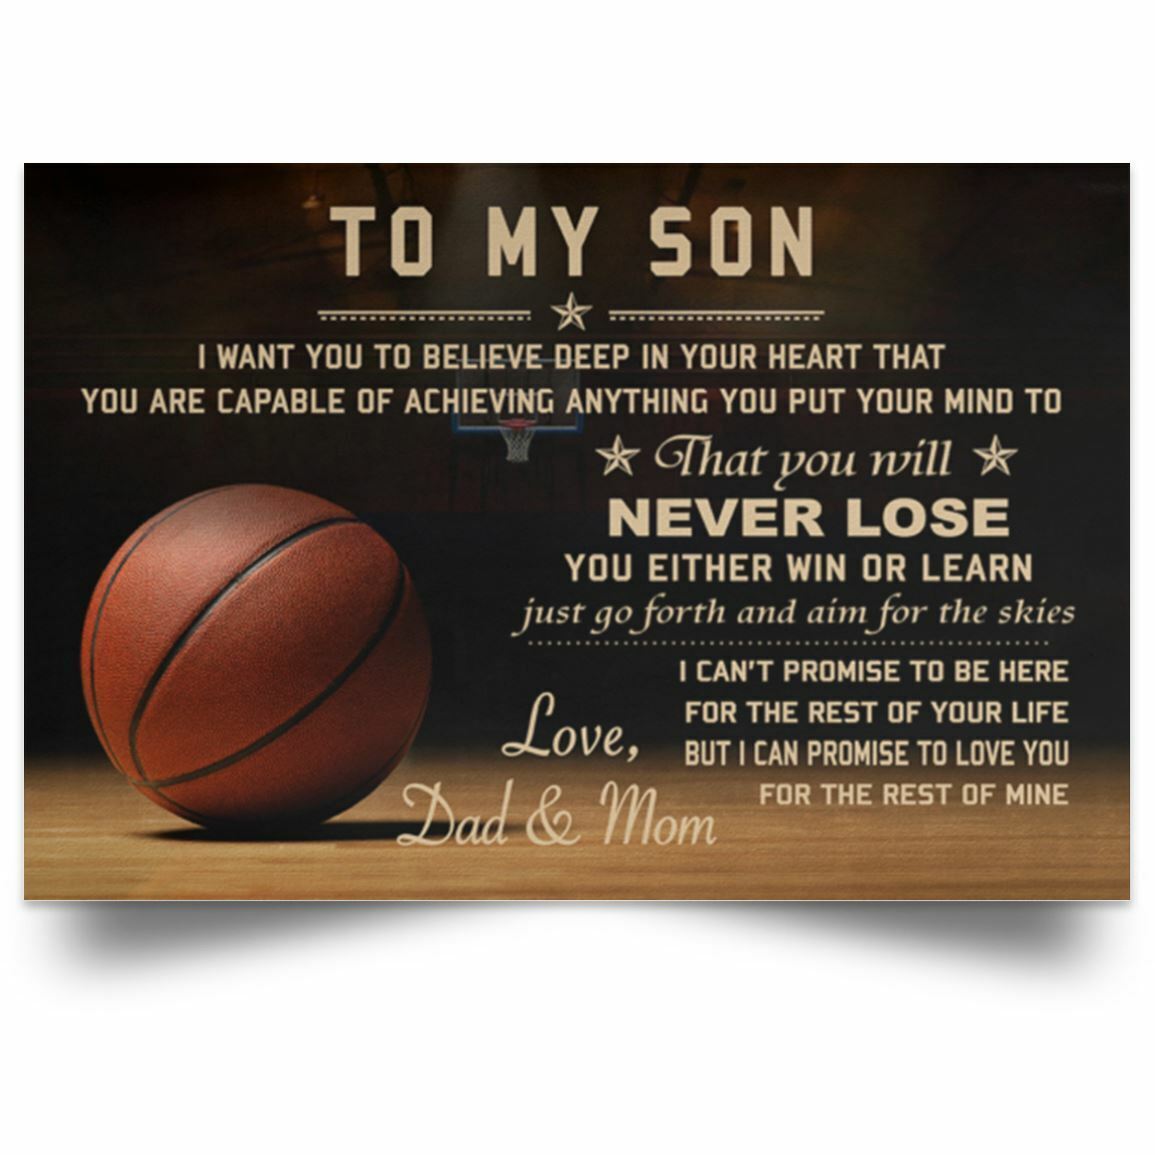 Inspirational quotes for my son: Empowering him to Achieve Greatness